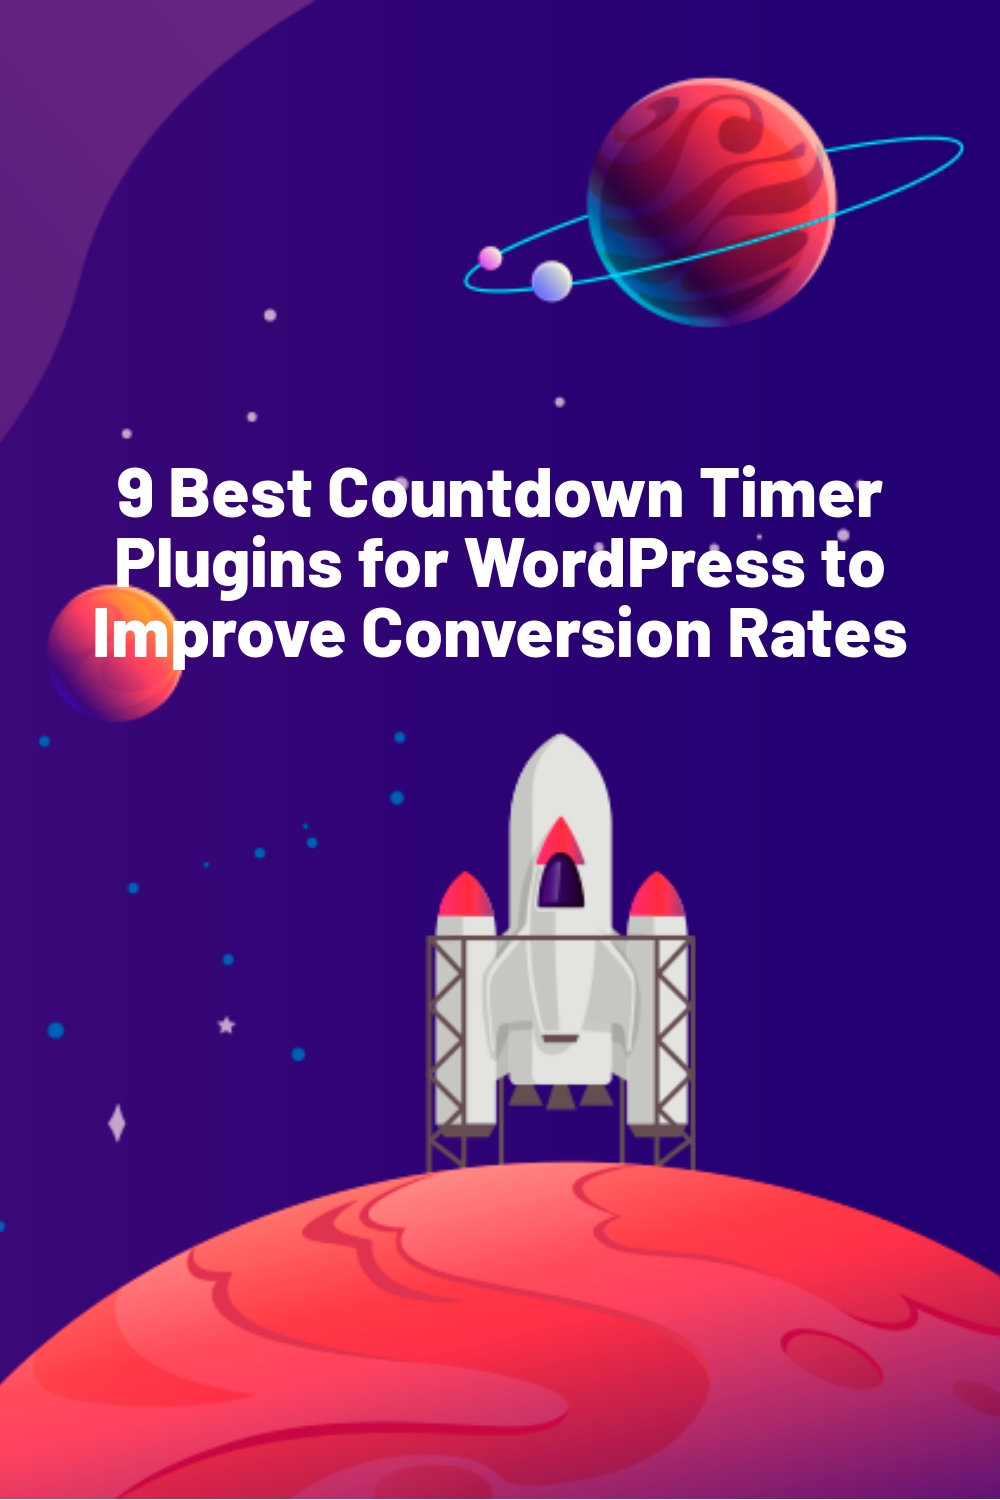 9 Best Countdown Timer Plugins for WordPress to Improve Conversion Rates